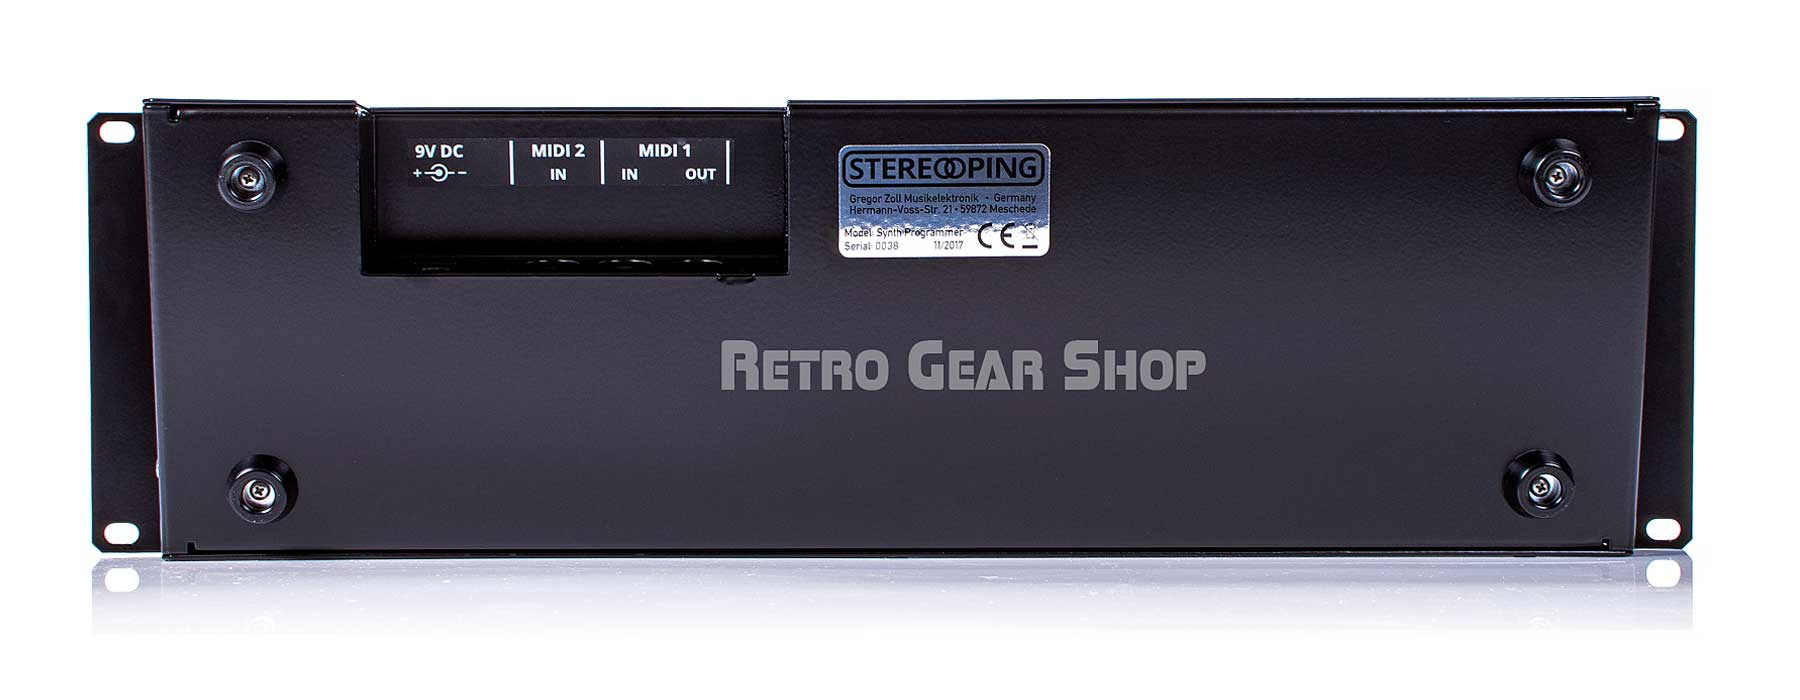 Stereoping Programmer Waldorf Microwave 1 Bottom